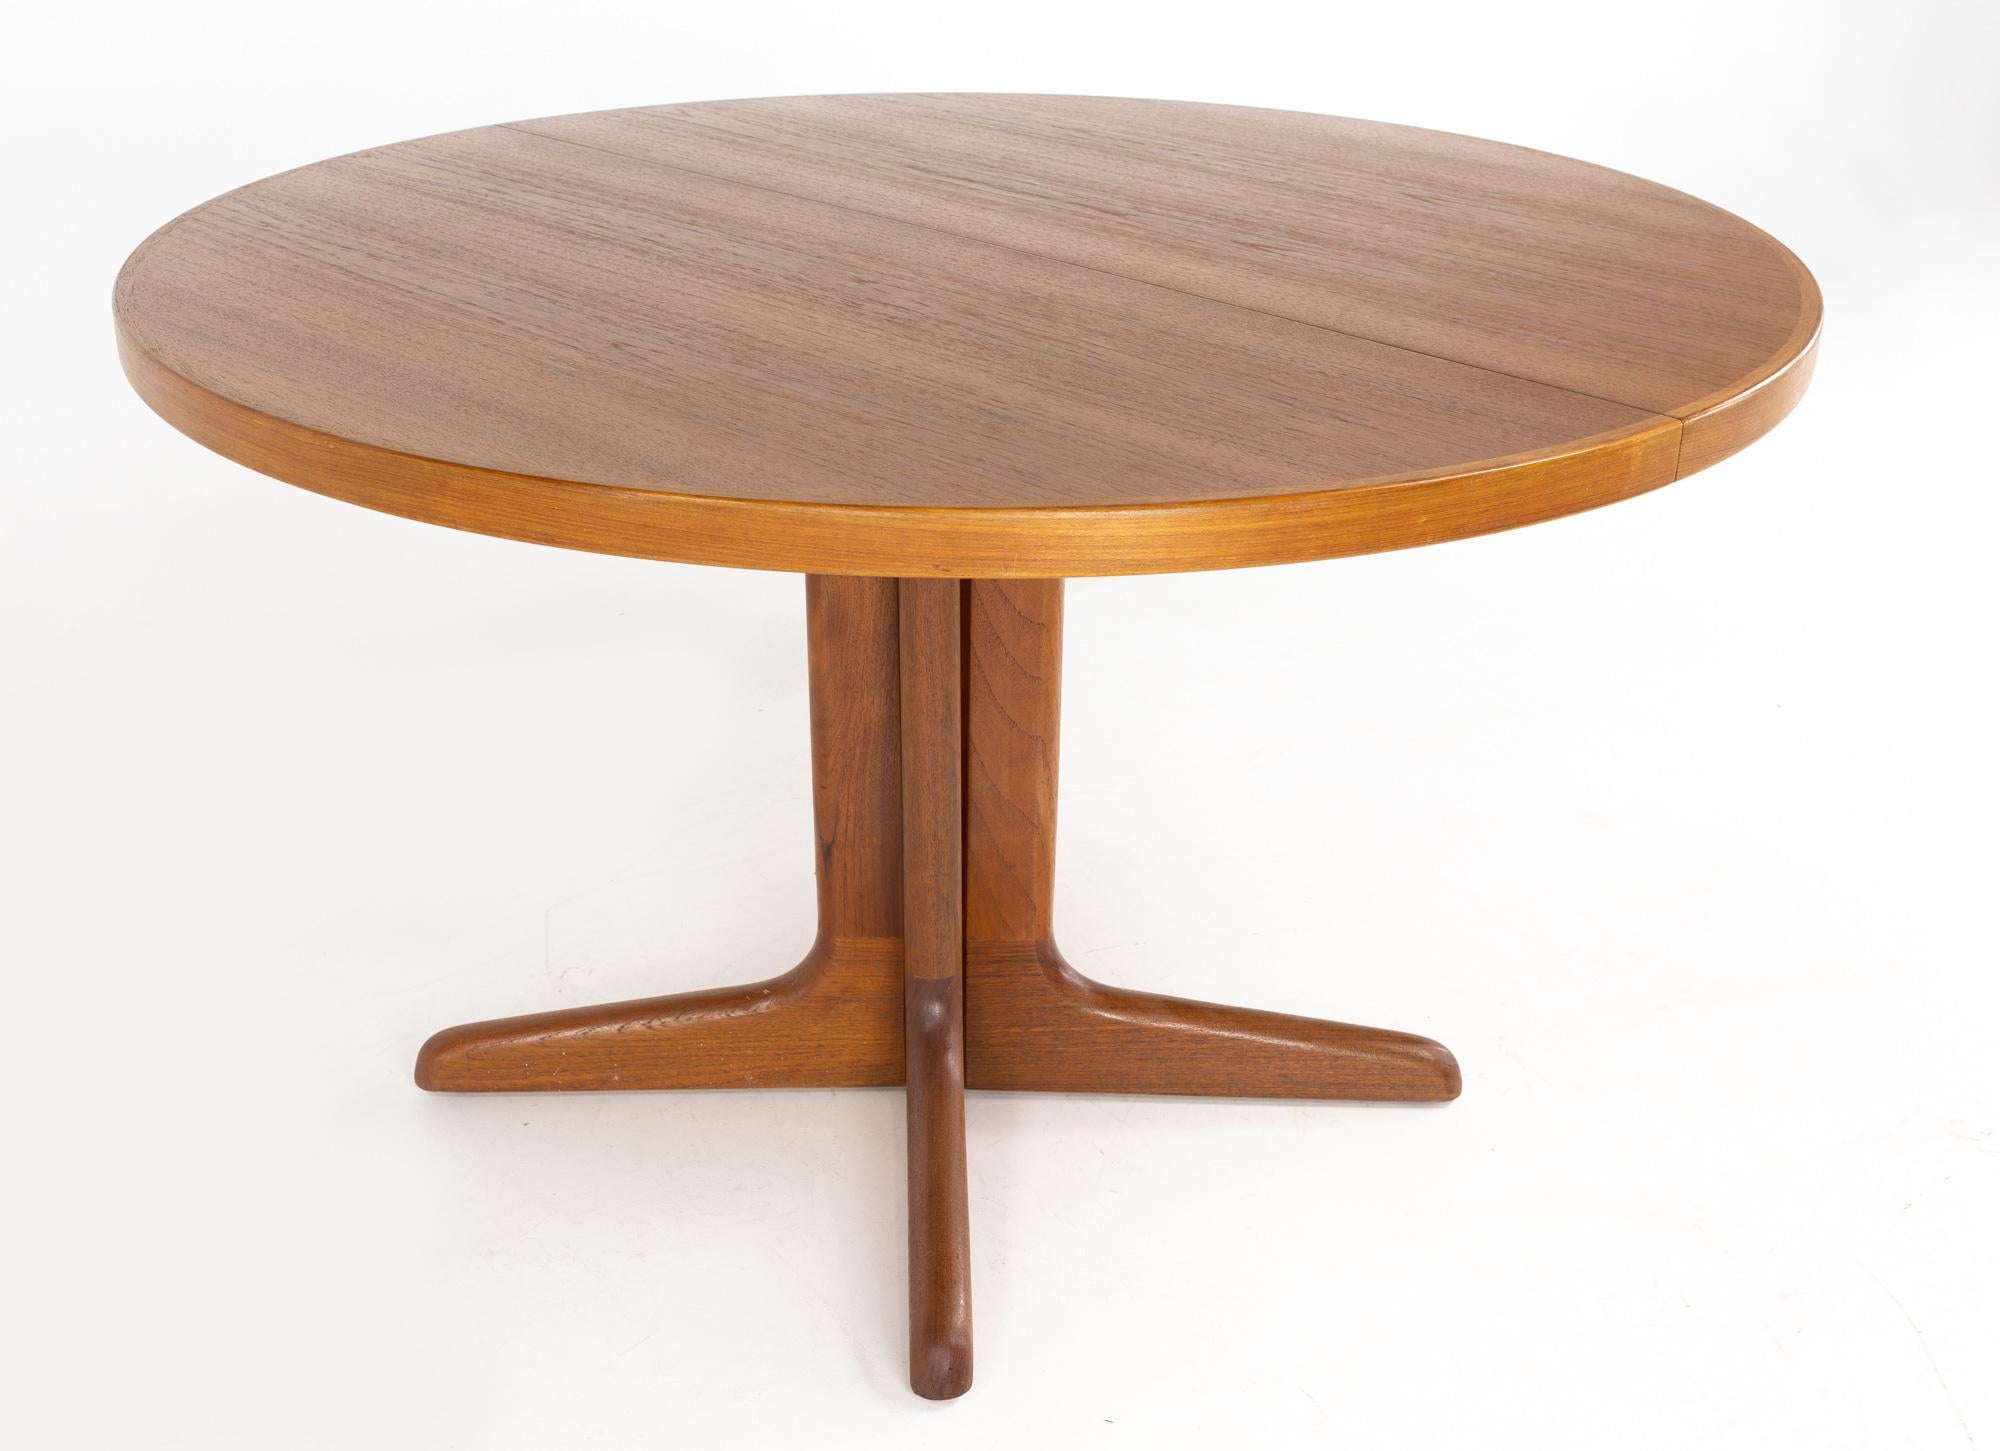 Mid Century Danish Teak pedestal base dining table with 2 Leaves

This table measures: 47.25 wide x 47.25 deep x 27.25 inches high, with a chair clearance of 25.5 inches, each of the 2 leaves are 20 inches wide, making a maximum table width of